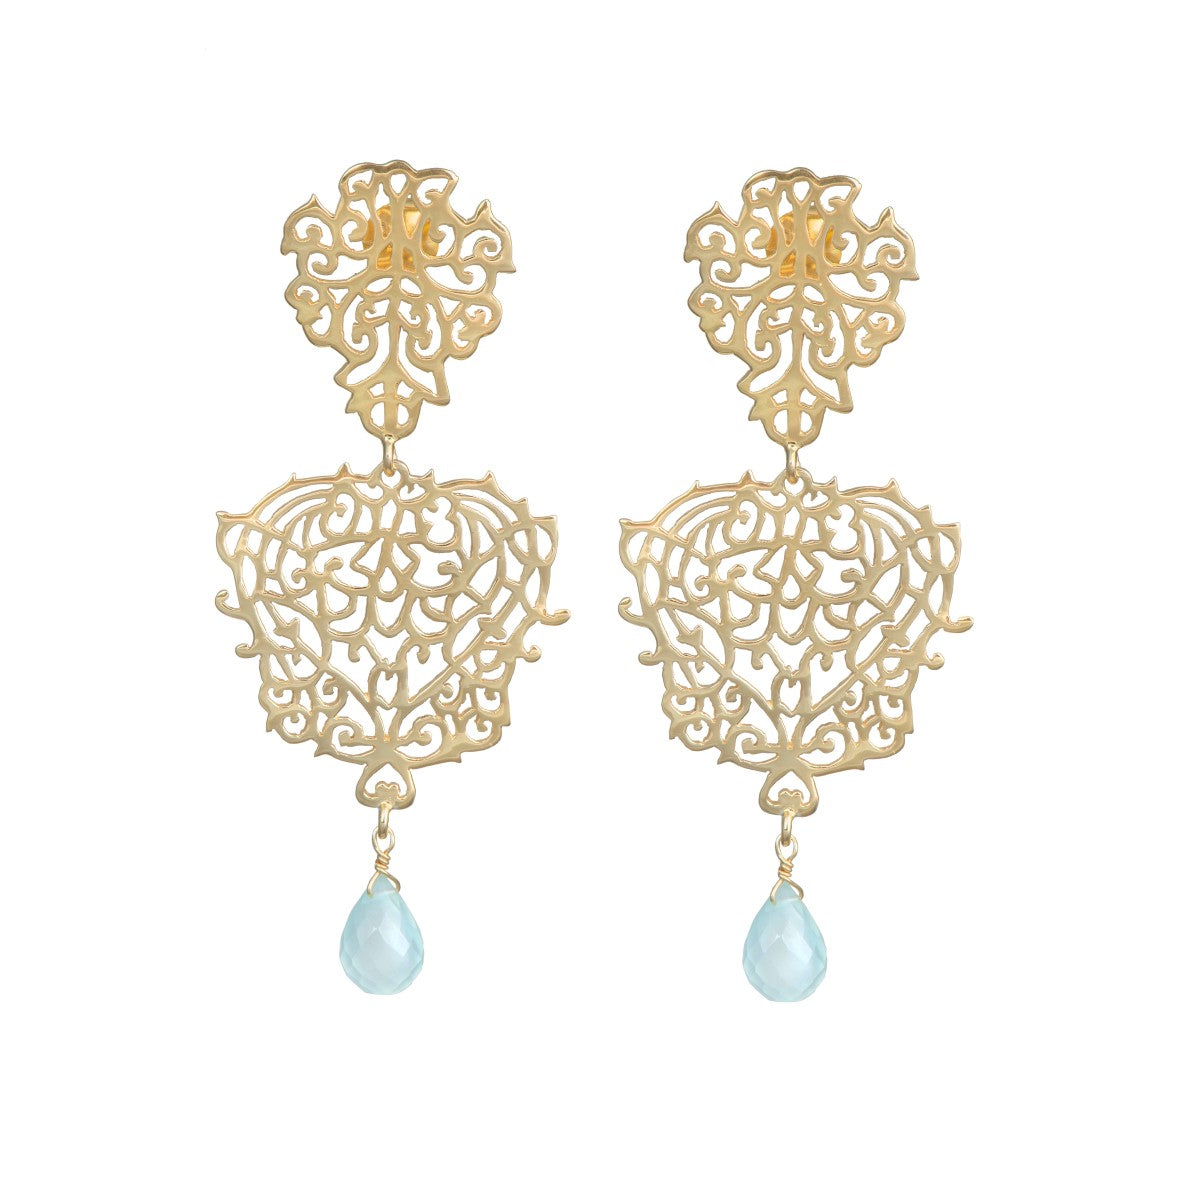 Gold Plated Sterling Silver Intricate Filigree Long Earrings with Stone Drop - Aqua Chalcedony